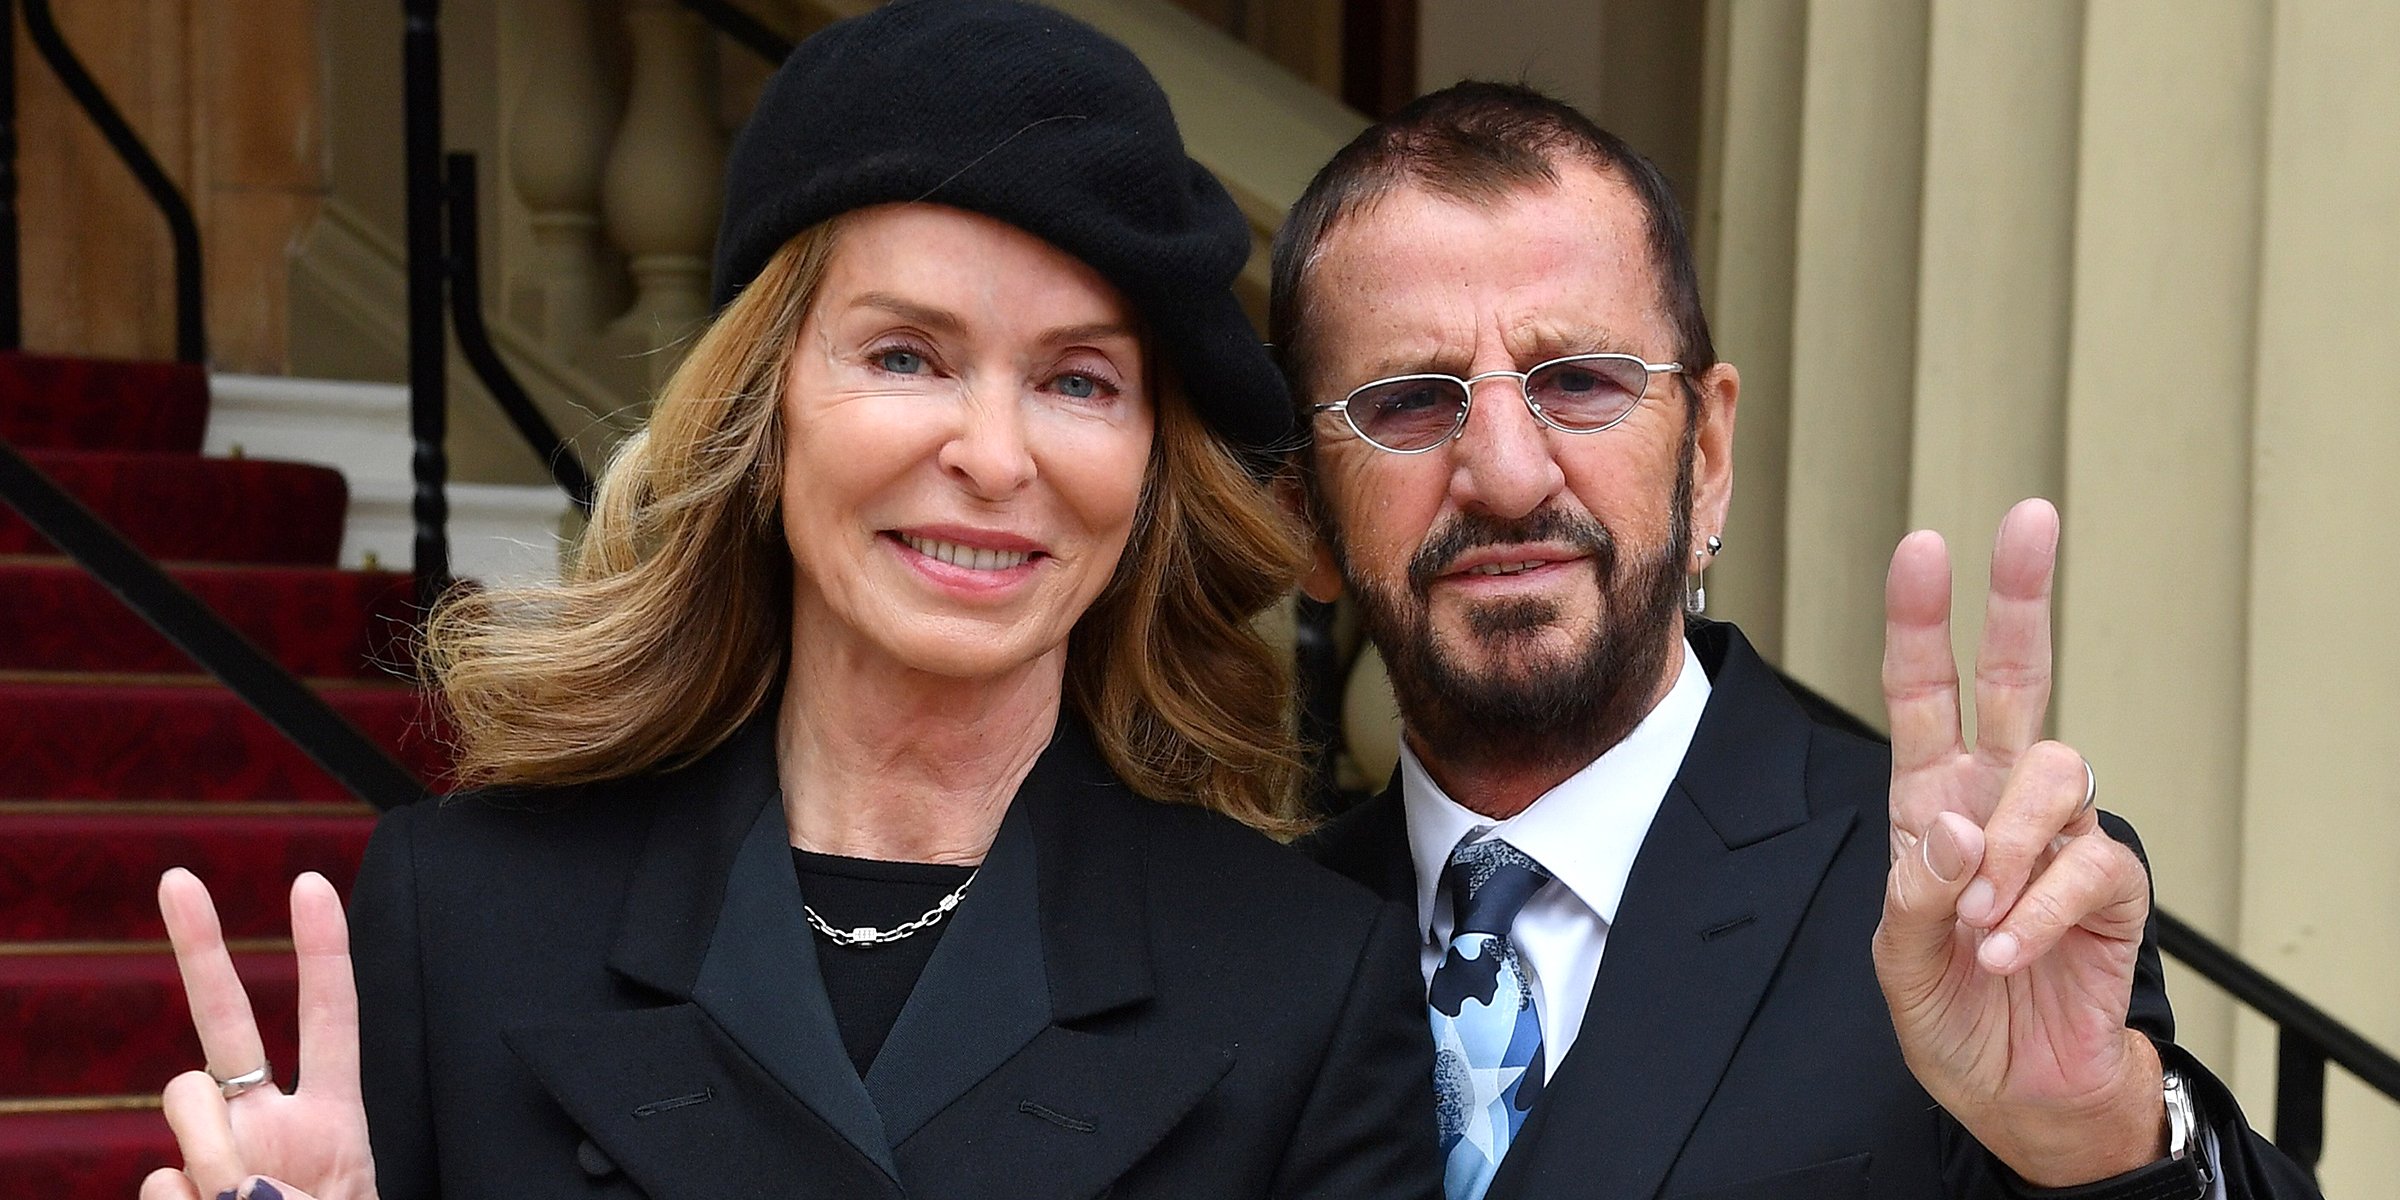 Barbara Bach and Ringo Starr, 2018 I Source: Getty Images